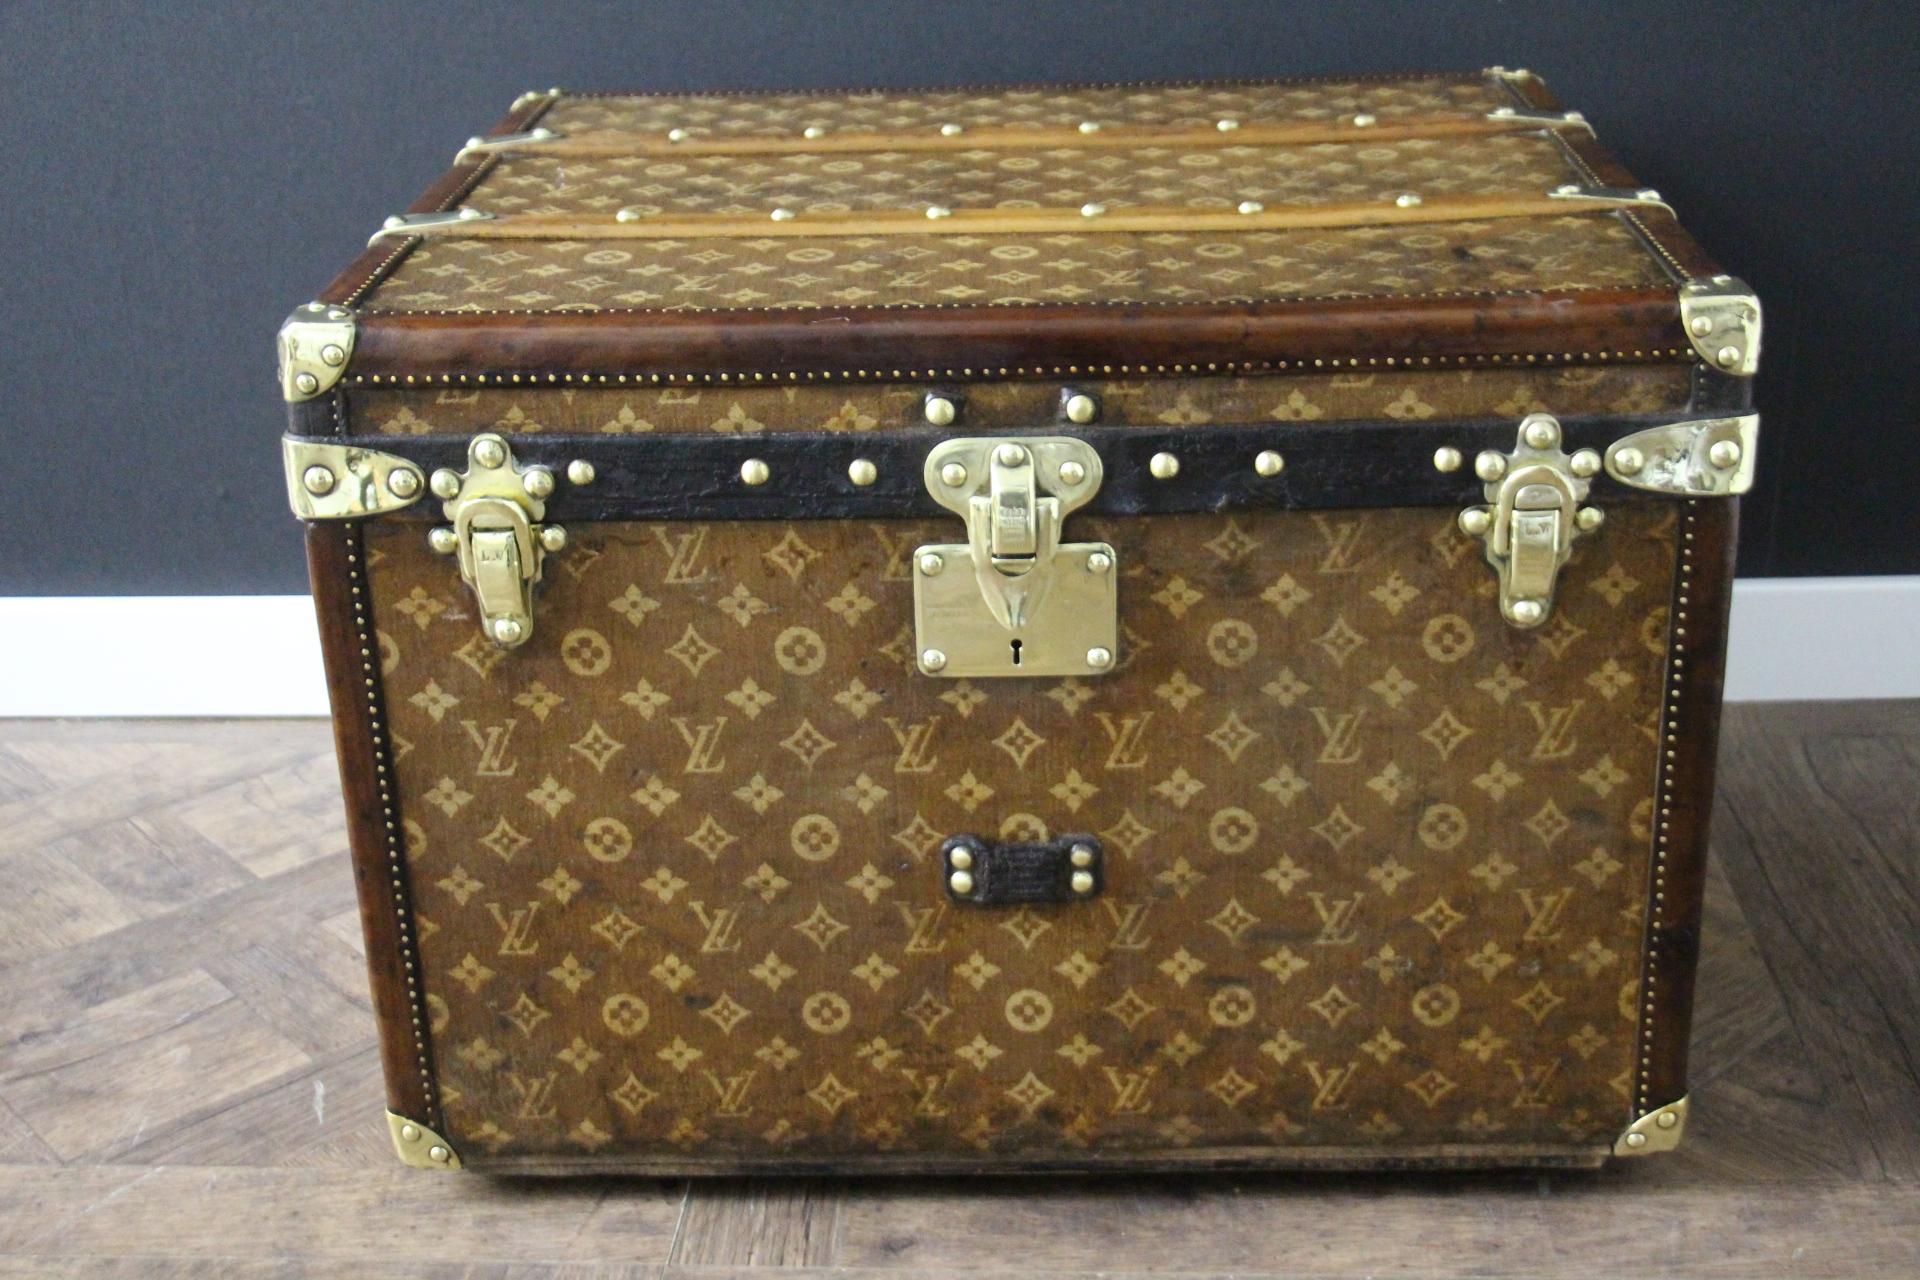 This lovely little Louis Vuitton steamer trunk features the very sought after  monogram woven canvas, leather trim, solid brass corners, solid brass locks, and side handles. Its brass locks, studs and side handles are all marked Louis Vuitton.
It